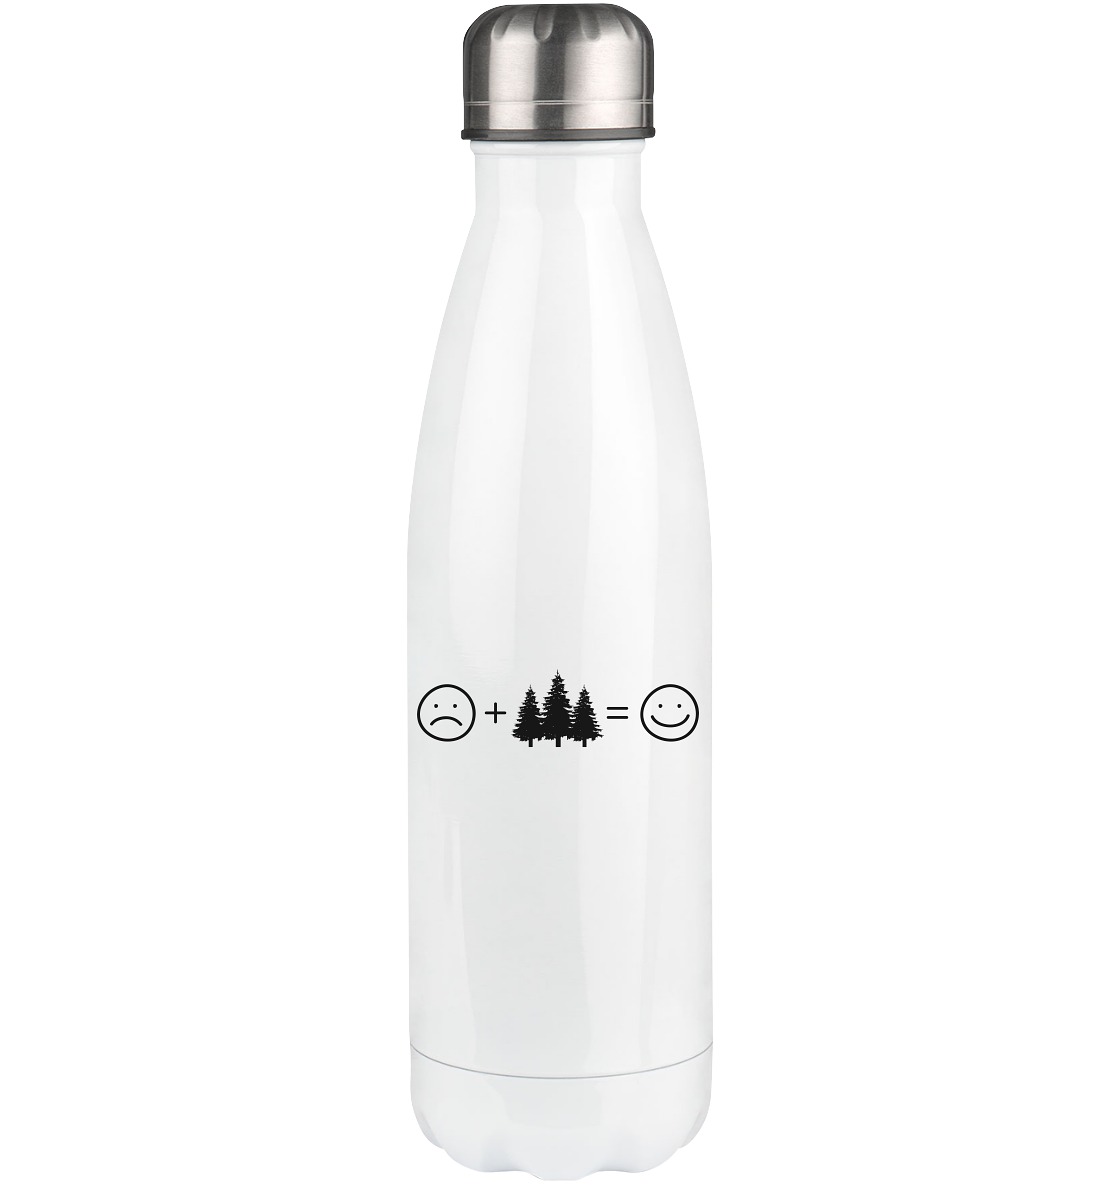 Emoji and Trees - Edelstahl Thermosflasche camping UONP 500ml